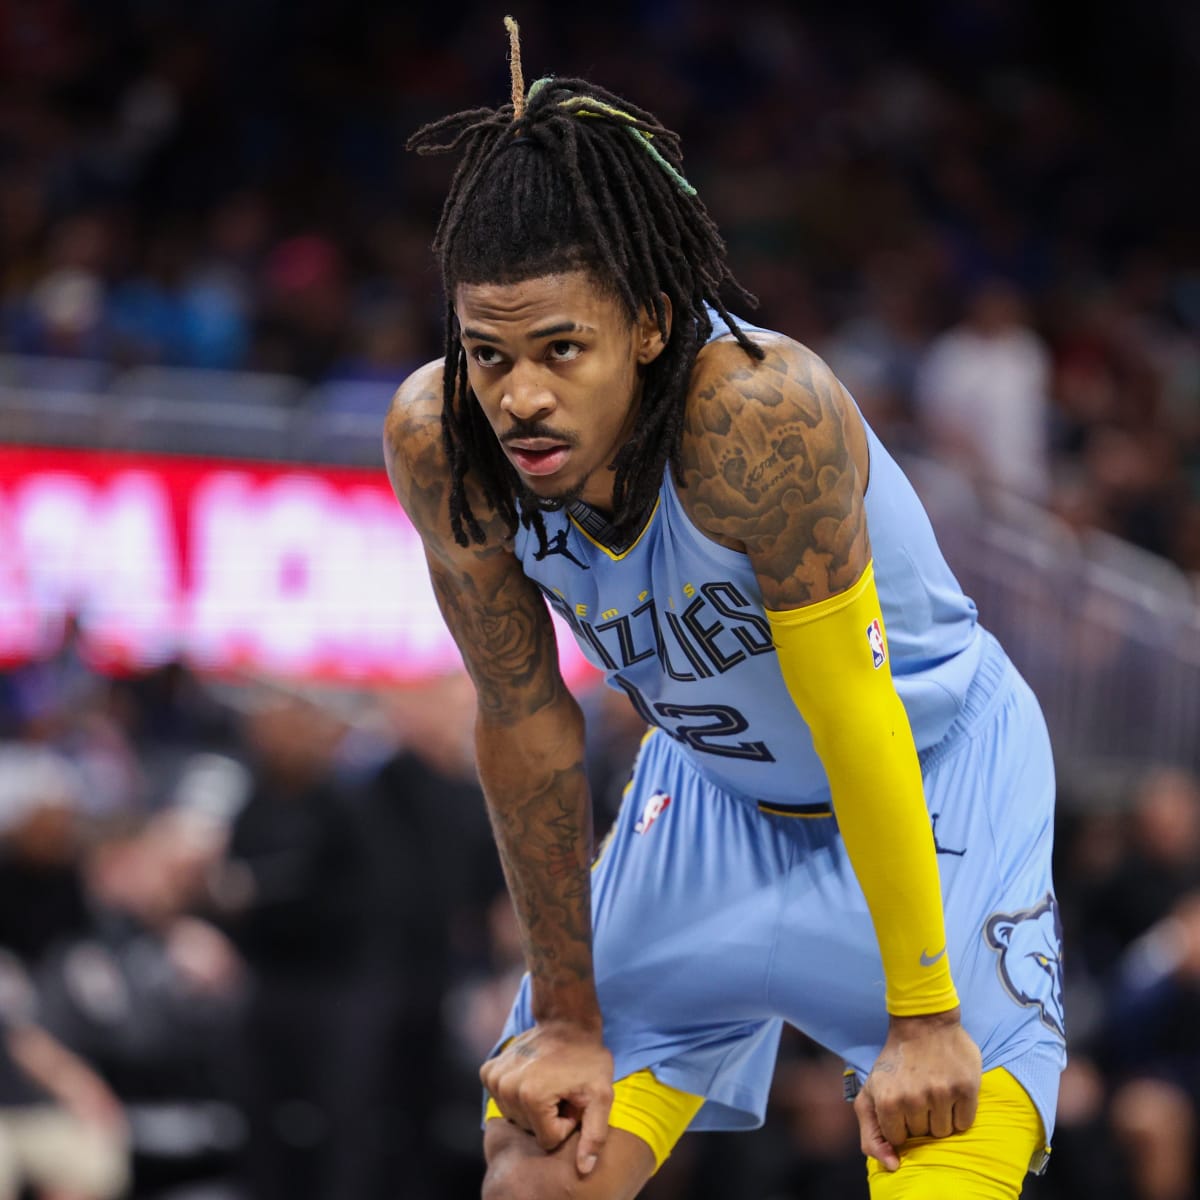 Ja Morant Was Suspended For Being 'Bad For Business,' Claims Anonymous NBA Agent